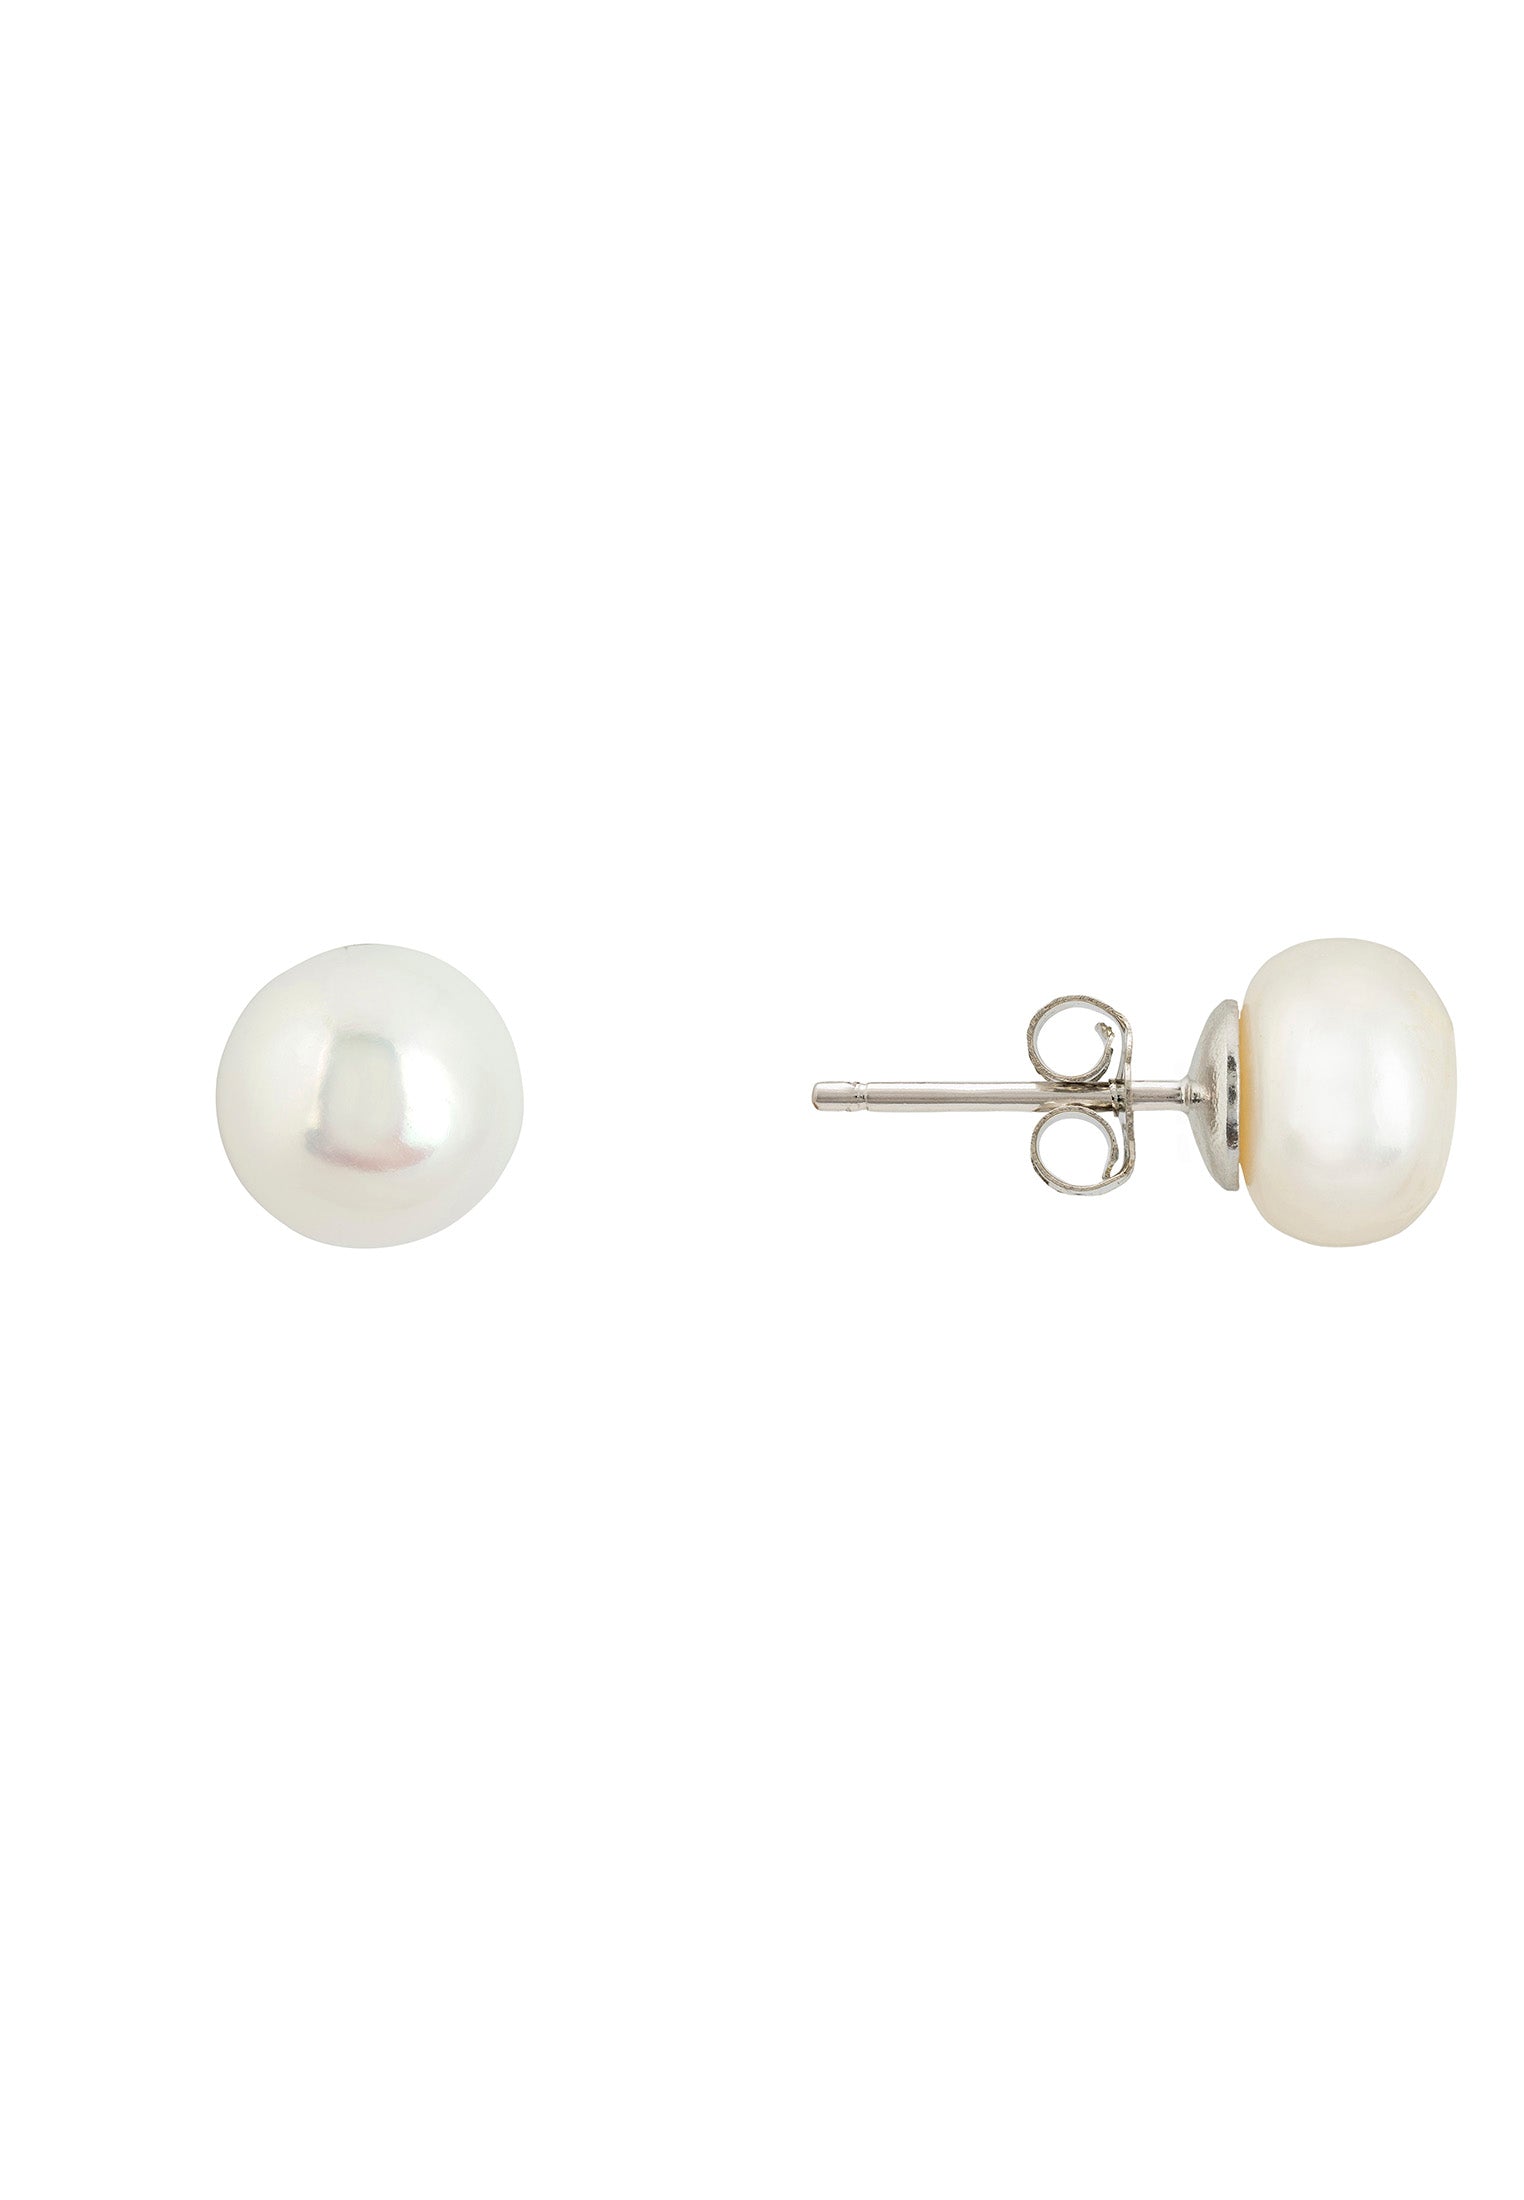 Solid 14K White Gold 8mm Classic Natural Pearl Stud Earrings